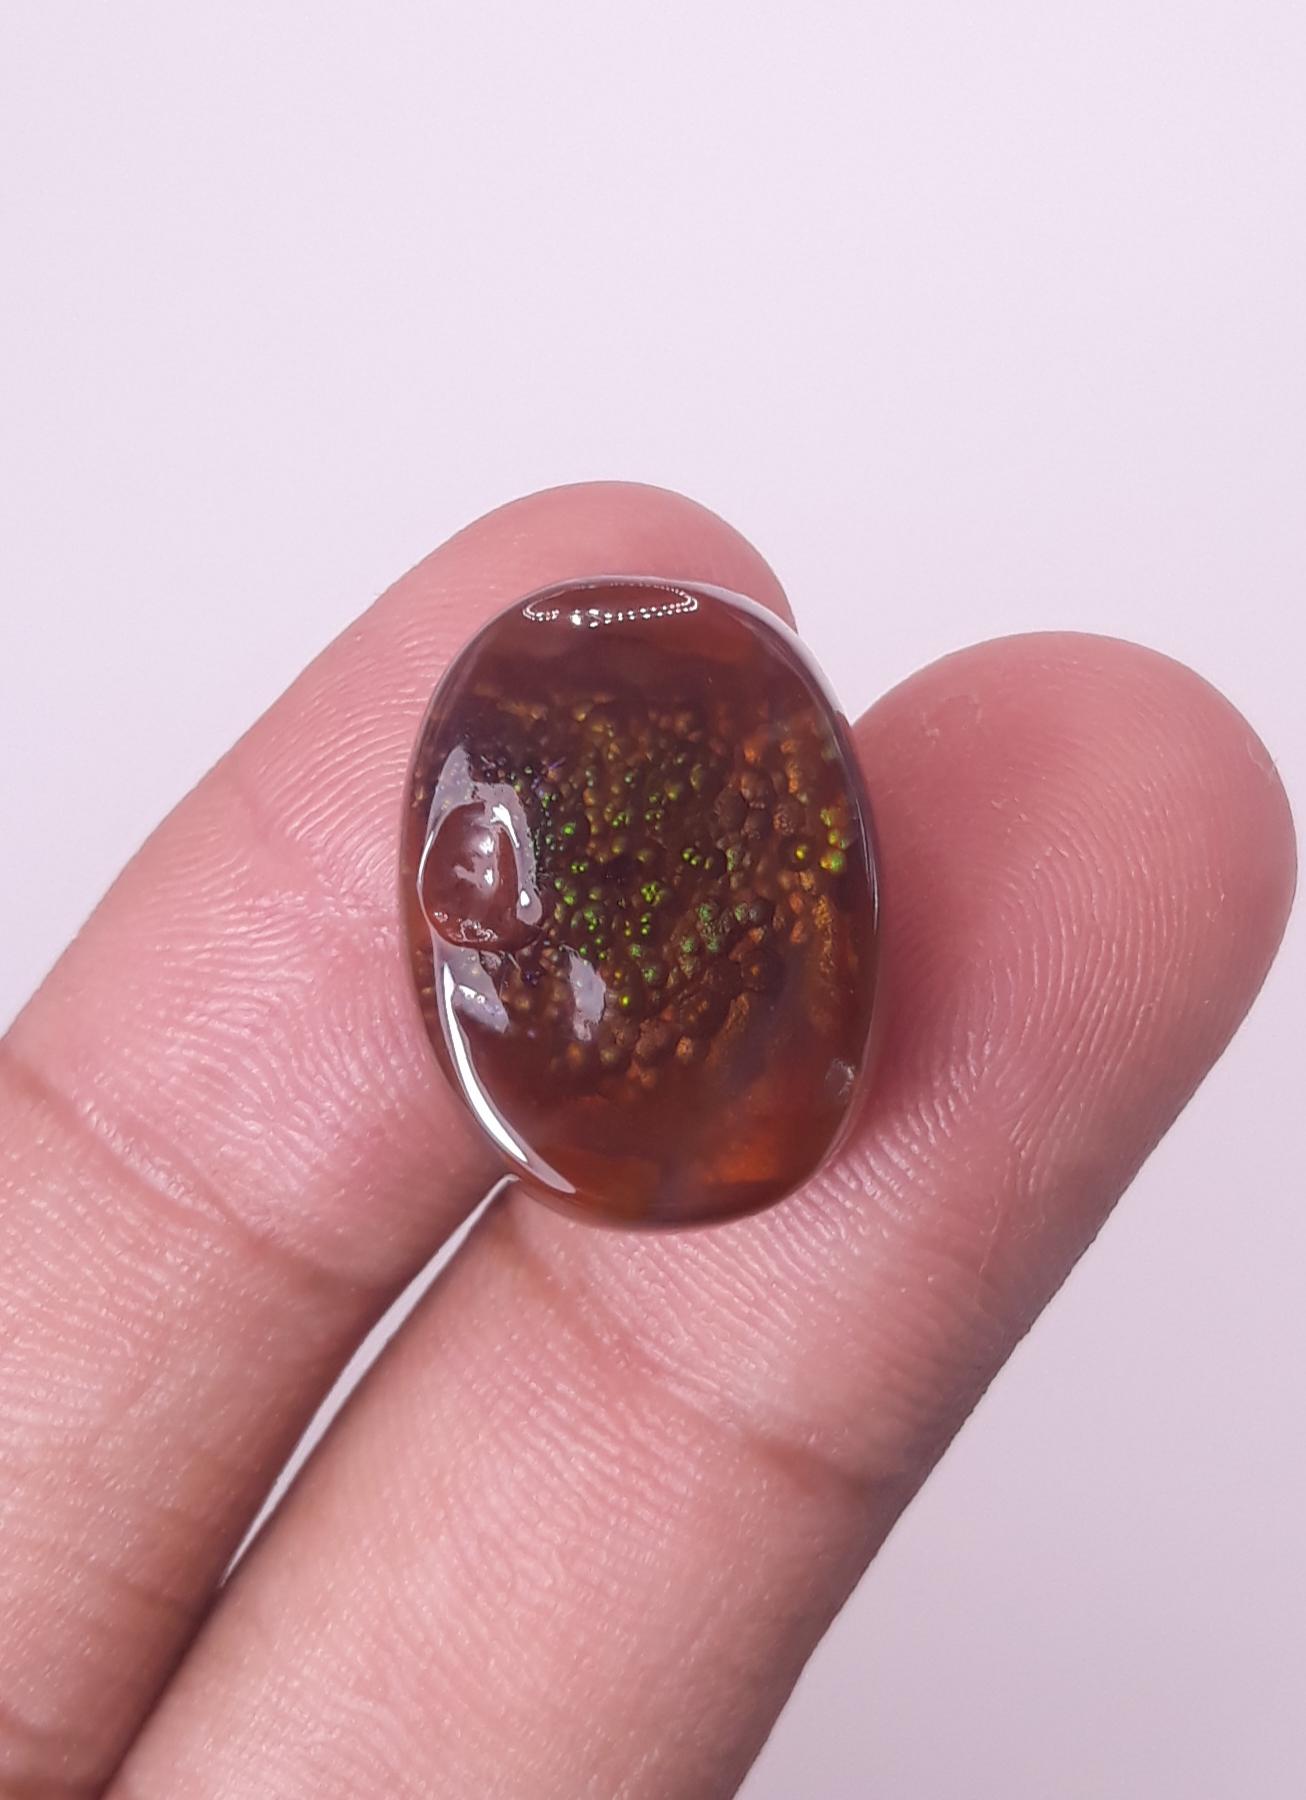 21.5ct Colorful Bubbly Fire Agate,  Rare Fire Agate - Perfect gemstone Gift, Rare Gemstone than Diamonds, Dimensions 21 x 16 mm